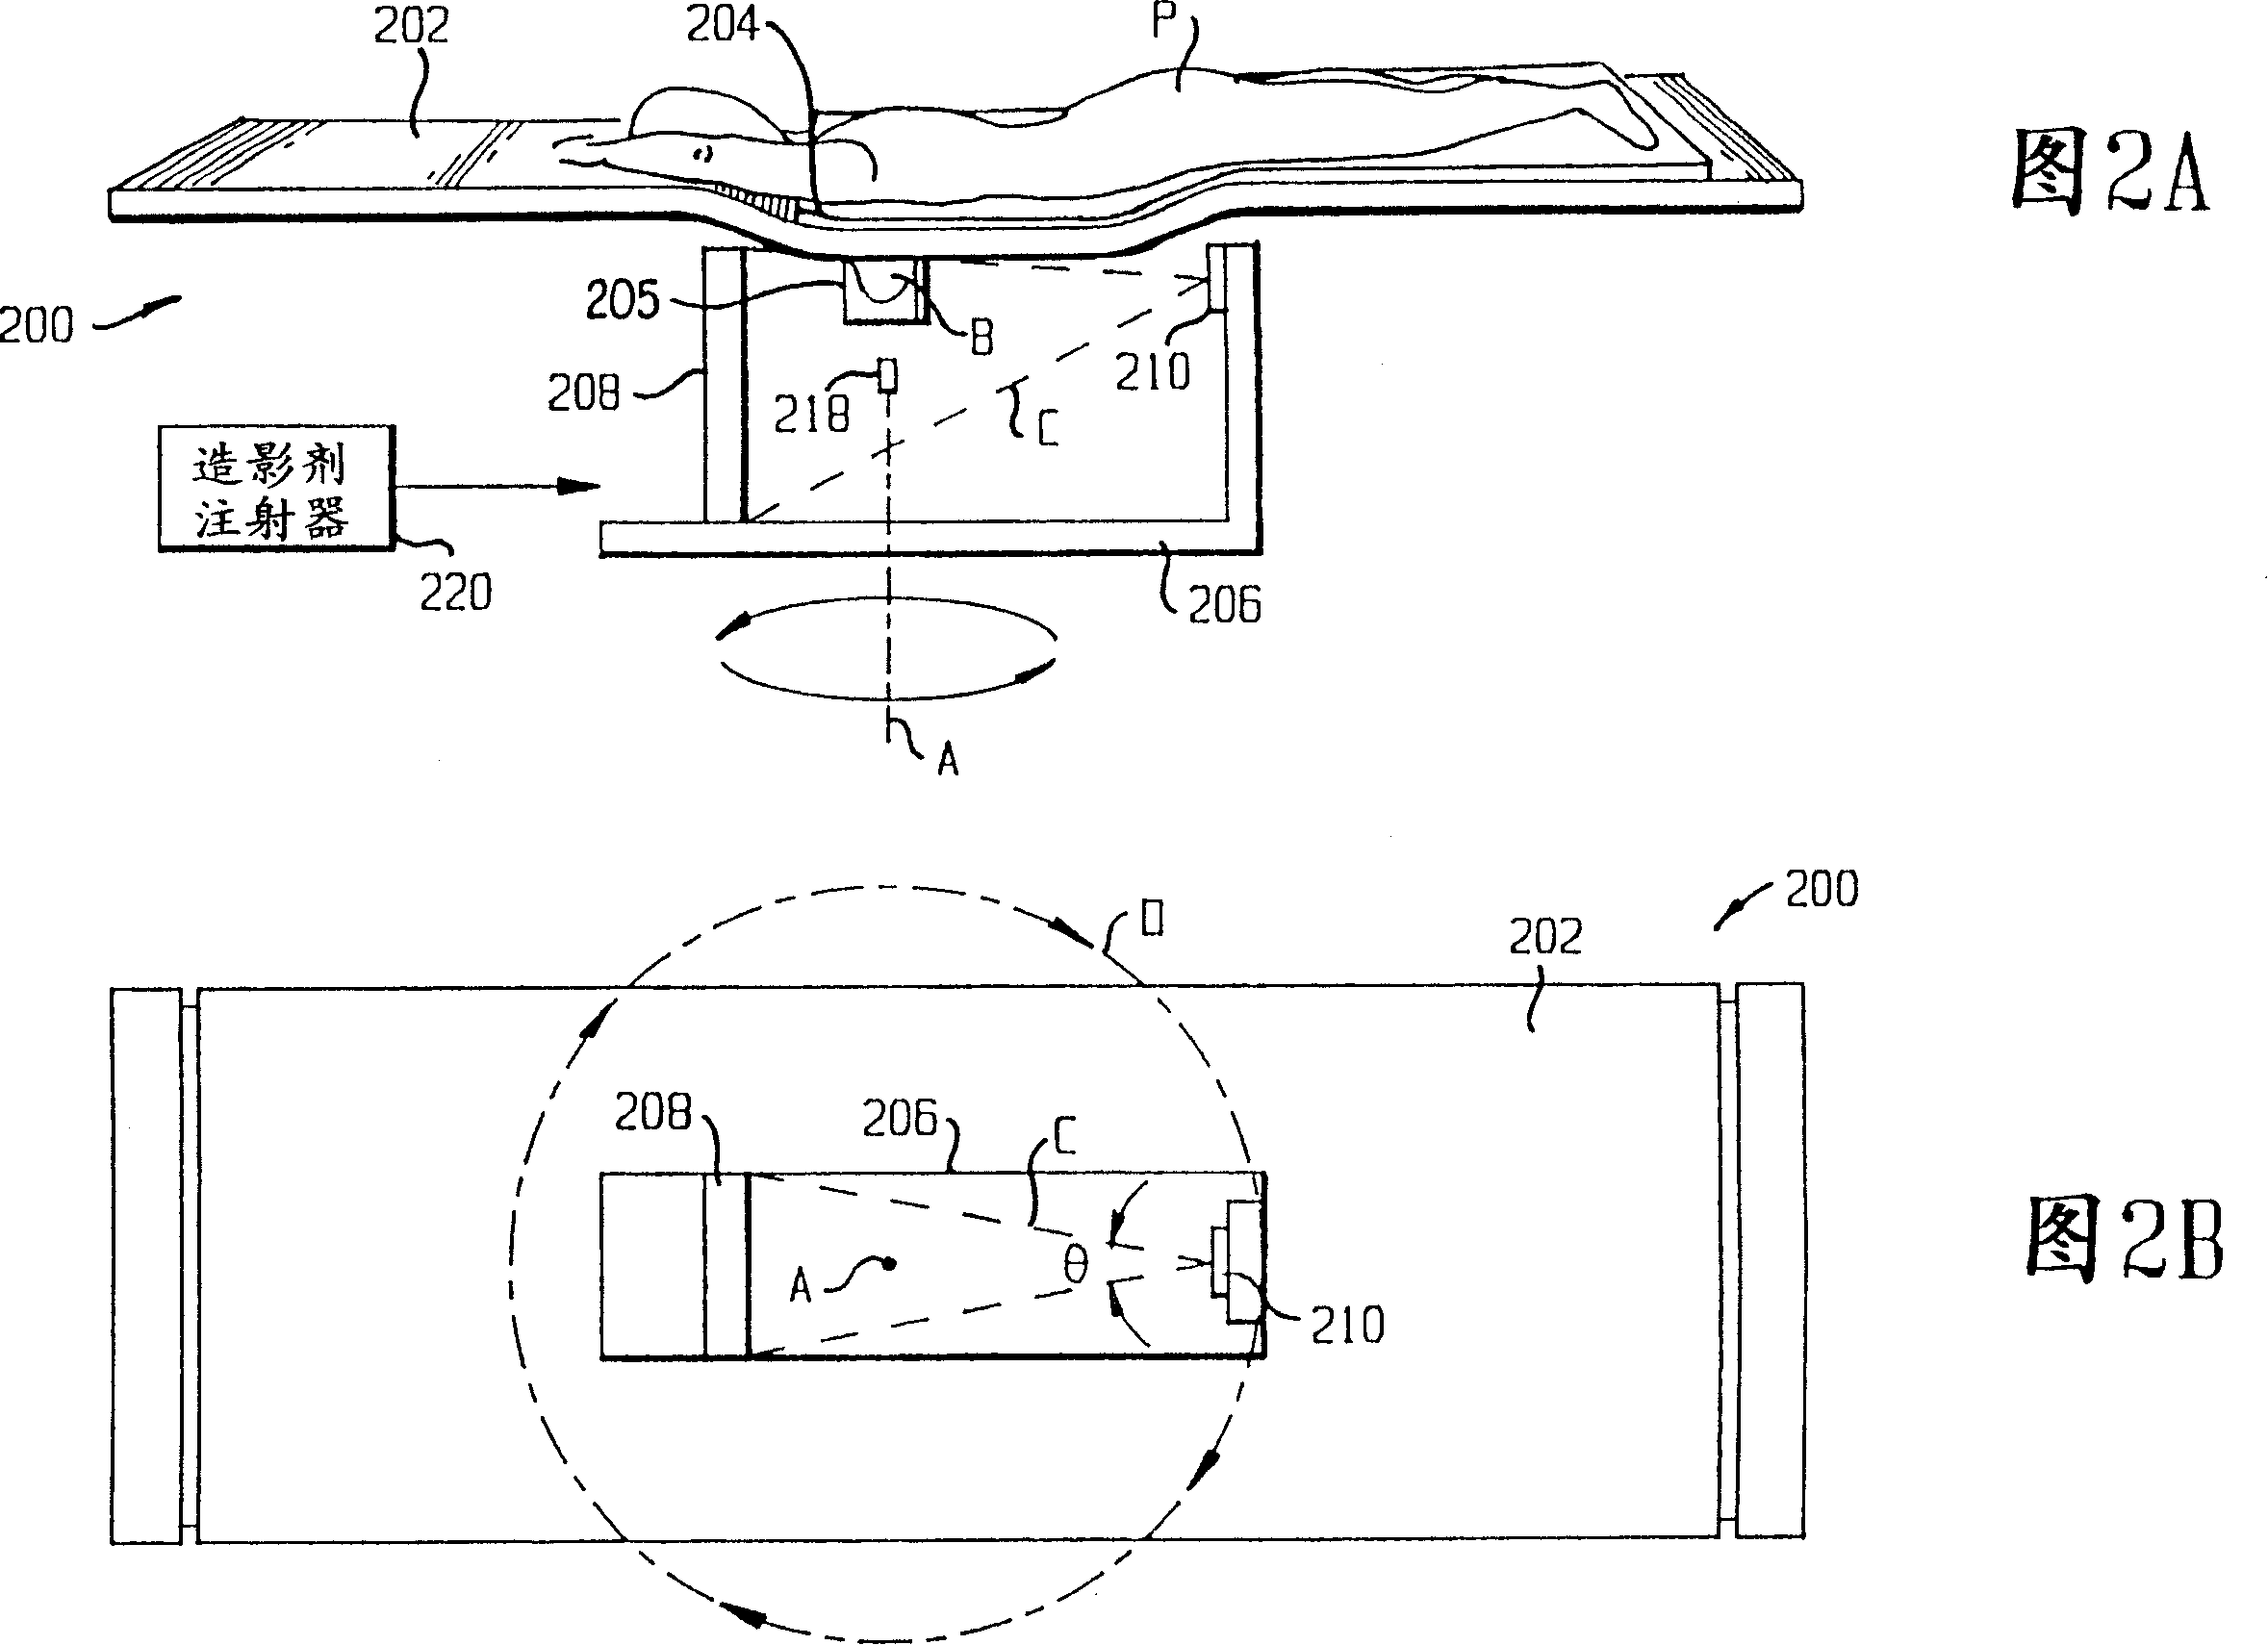 Apparatus and method for cone beam volume computed tomography mammography